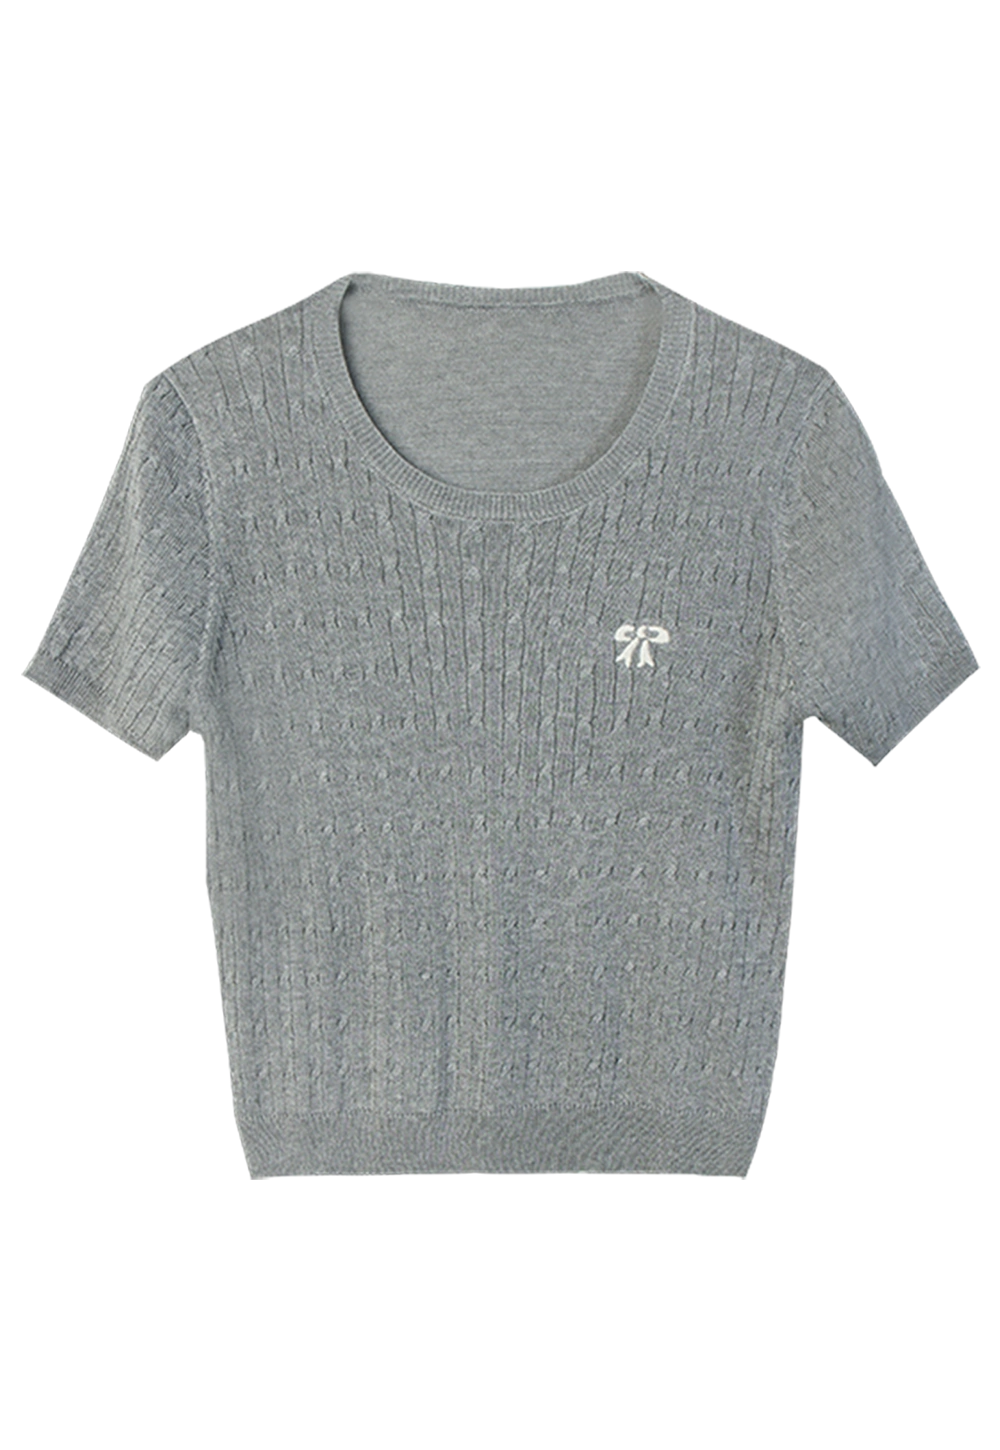 Women's Lightweight Short Sleeve Knit Top with Textured Pattern in Heather